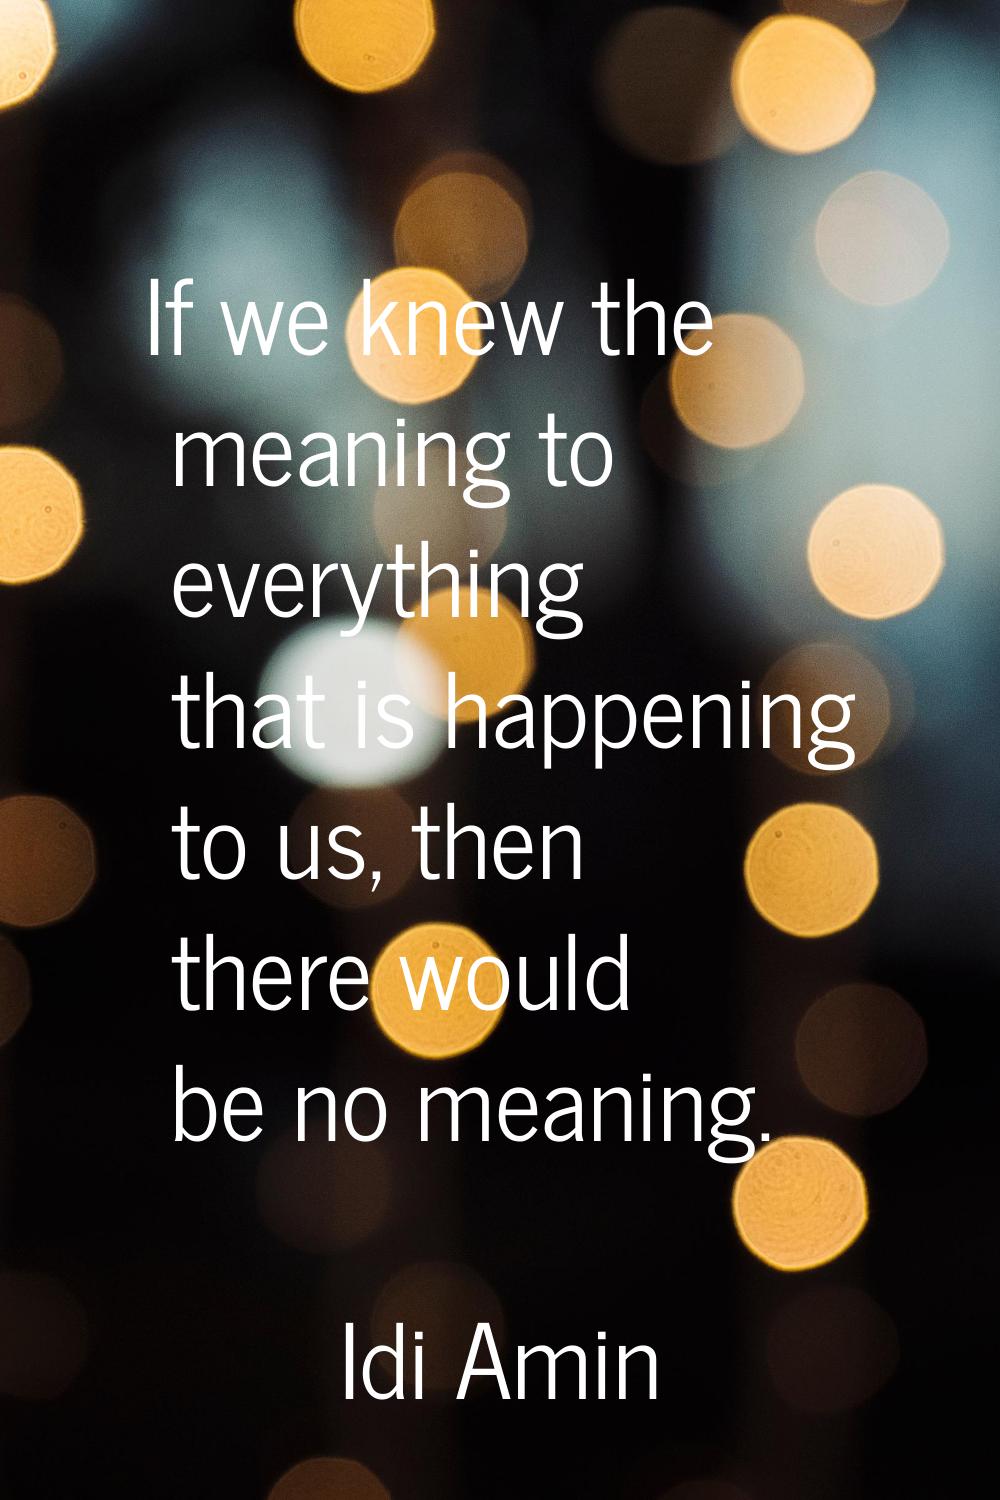 If we knew the meaning to everything that is happening to us, then there would be no meaning.